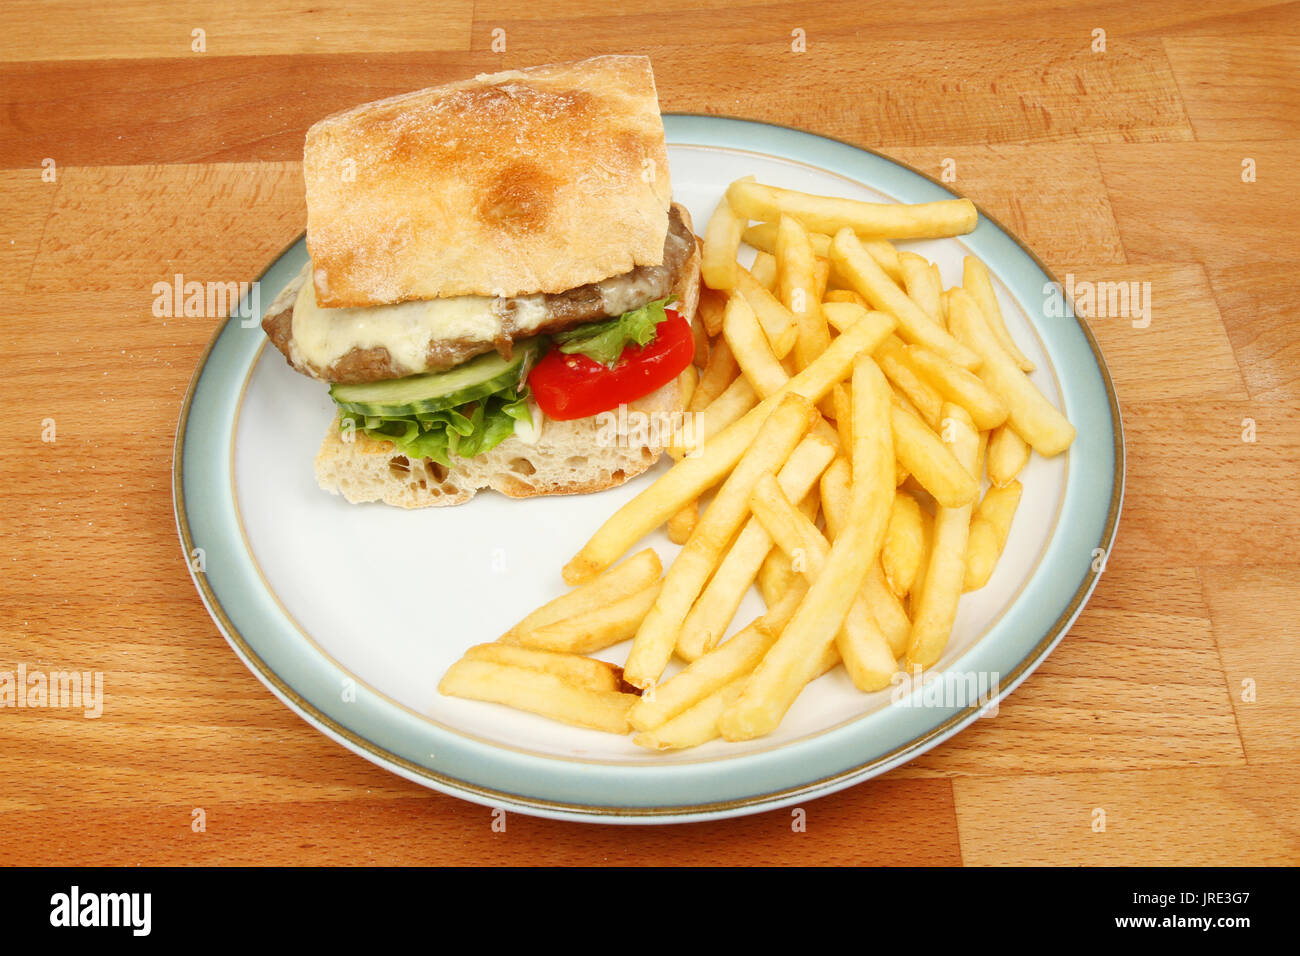 Cheeseburger with French fries on a plate on a wooden tabletop Stock Photo